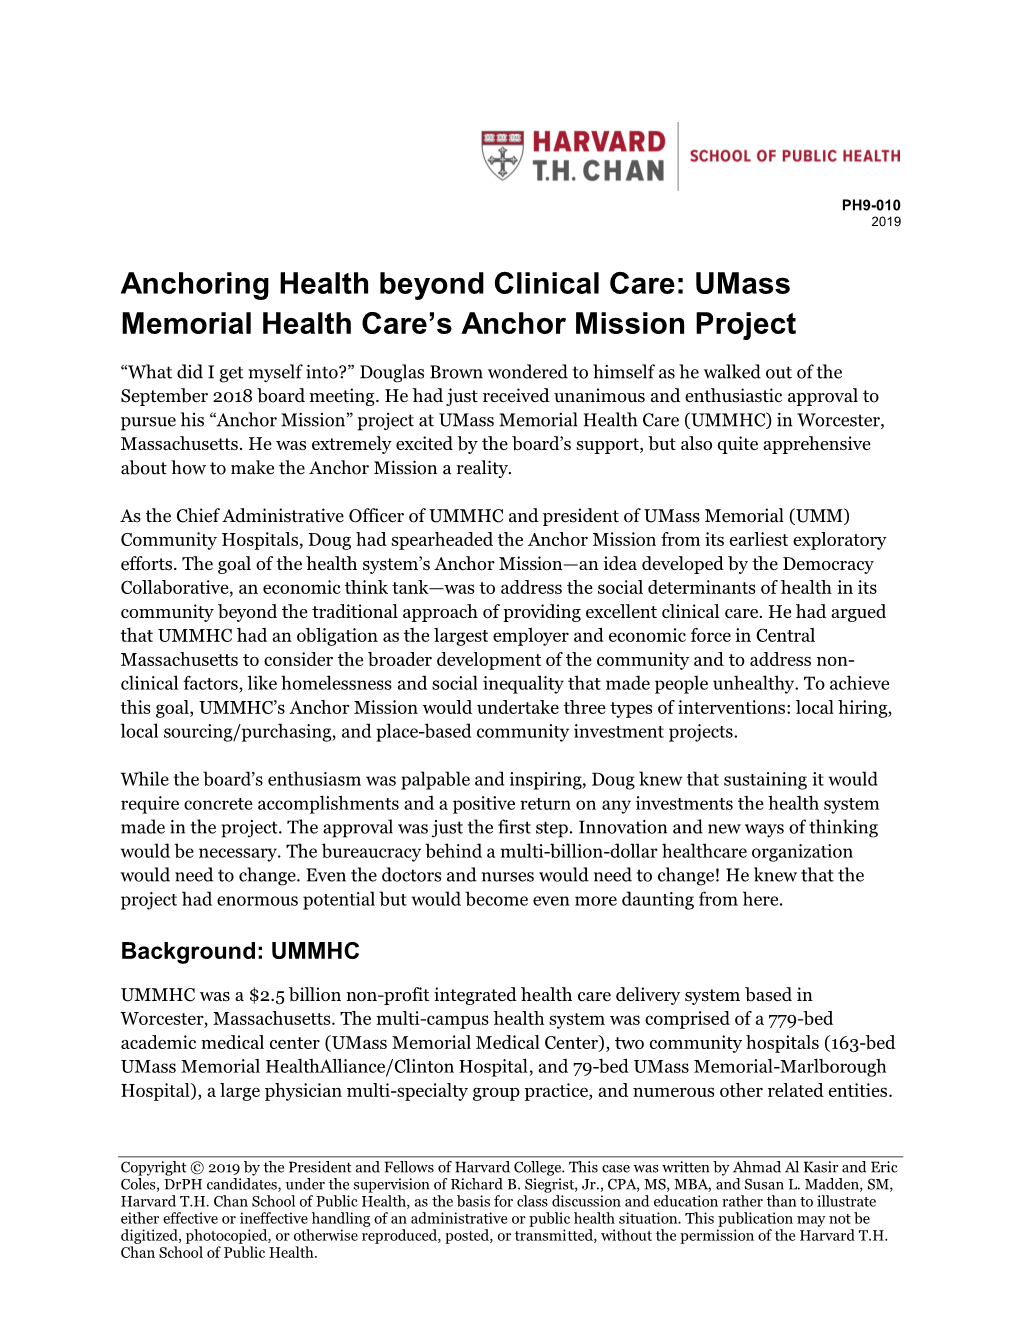 Umass Memorial Health Care's Anchor Mission Project